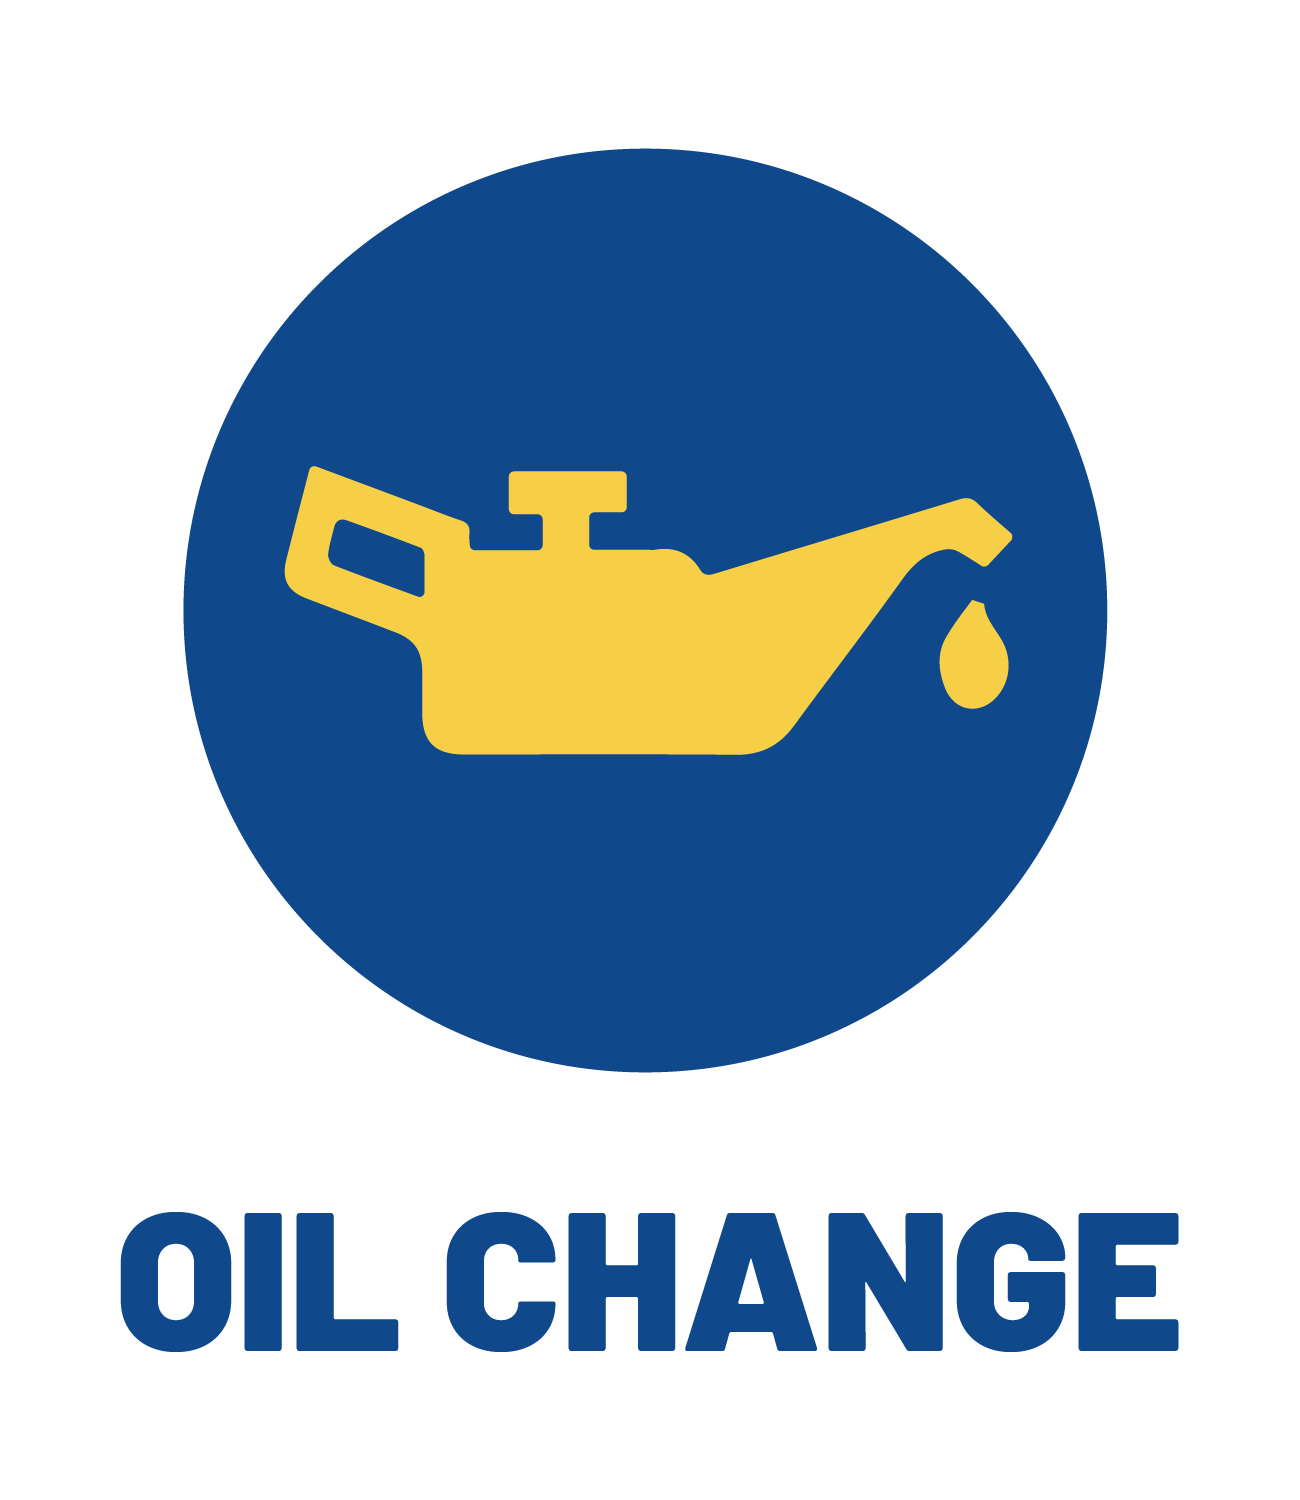 Learn more about oil changes